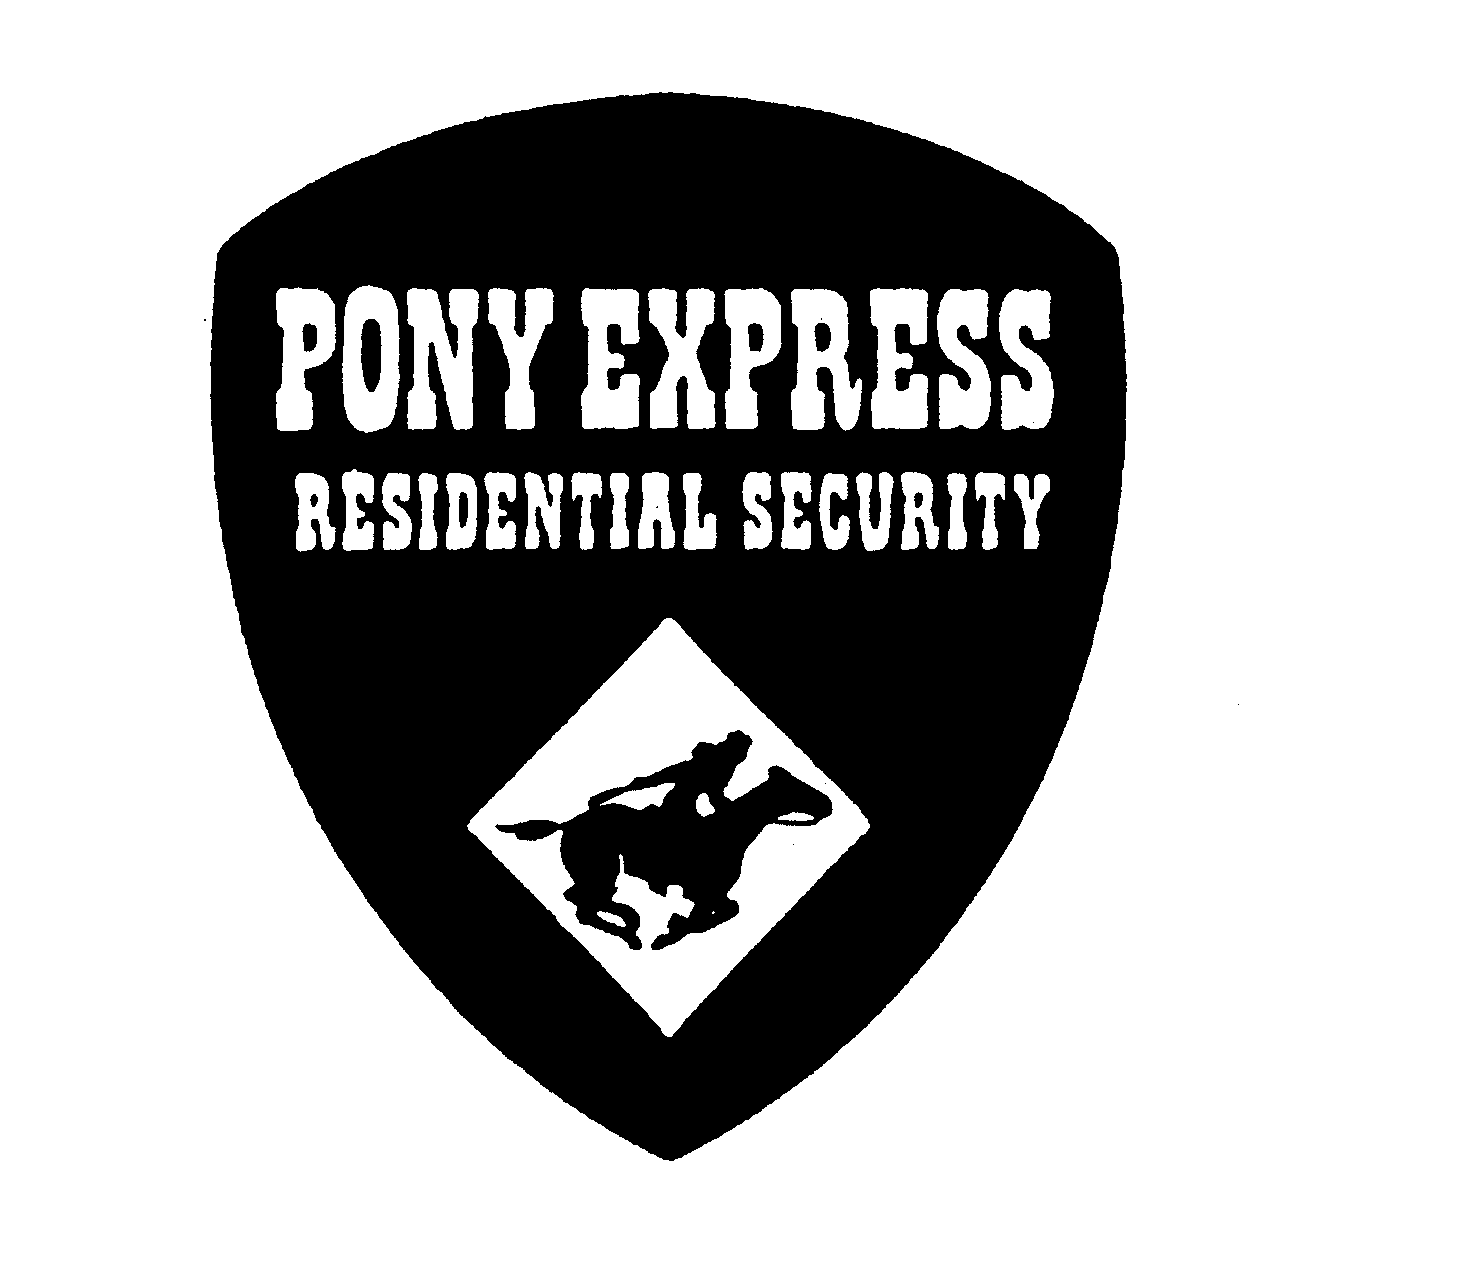  PONY EXPRESS RESIDENTIAL SECURITY